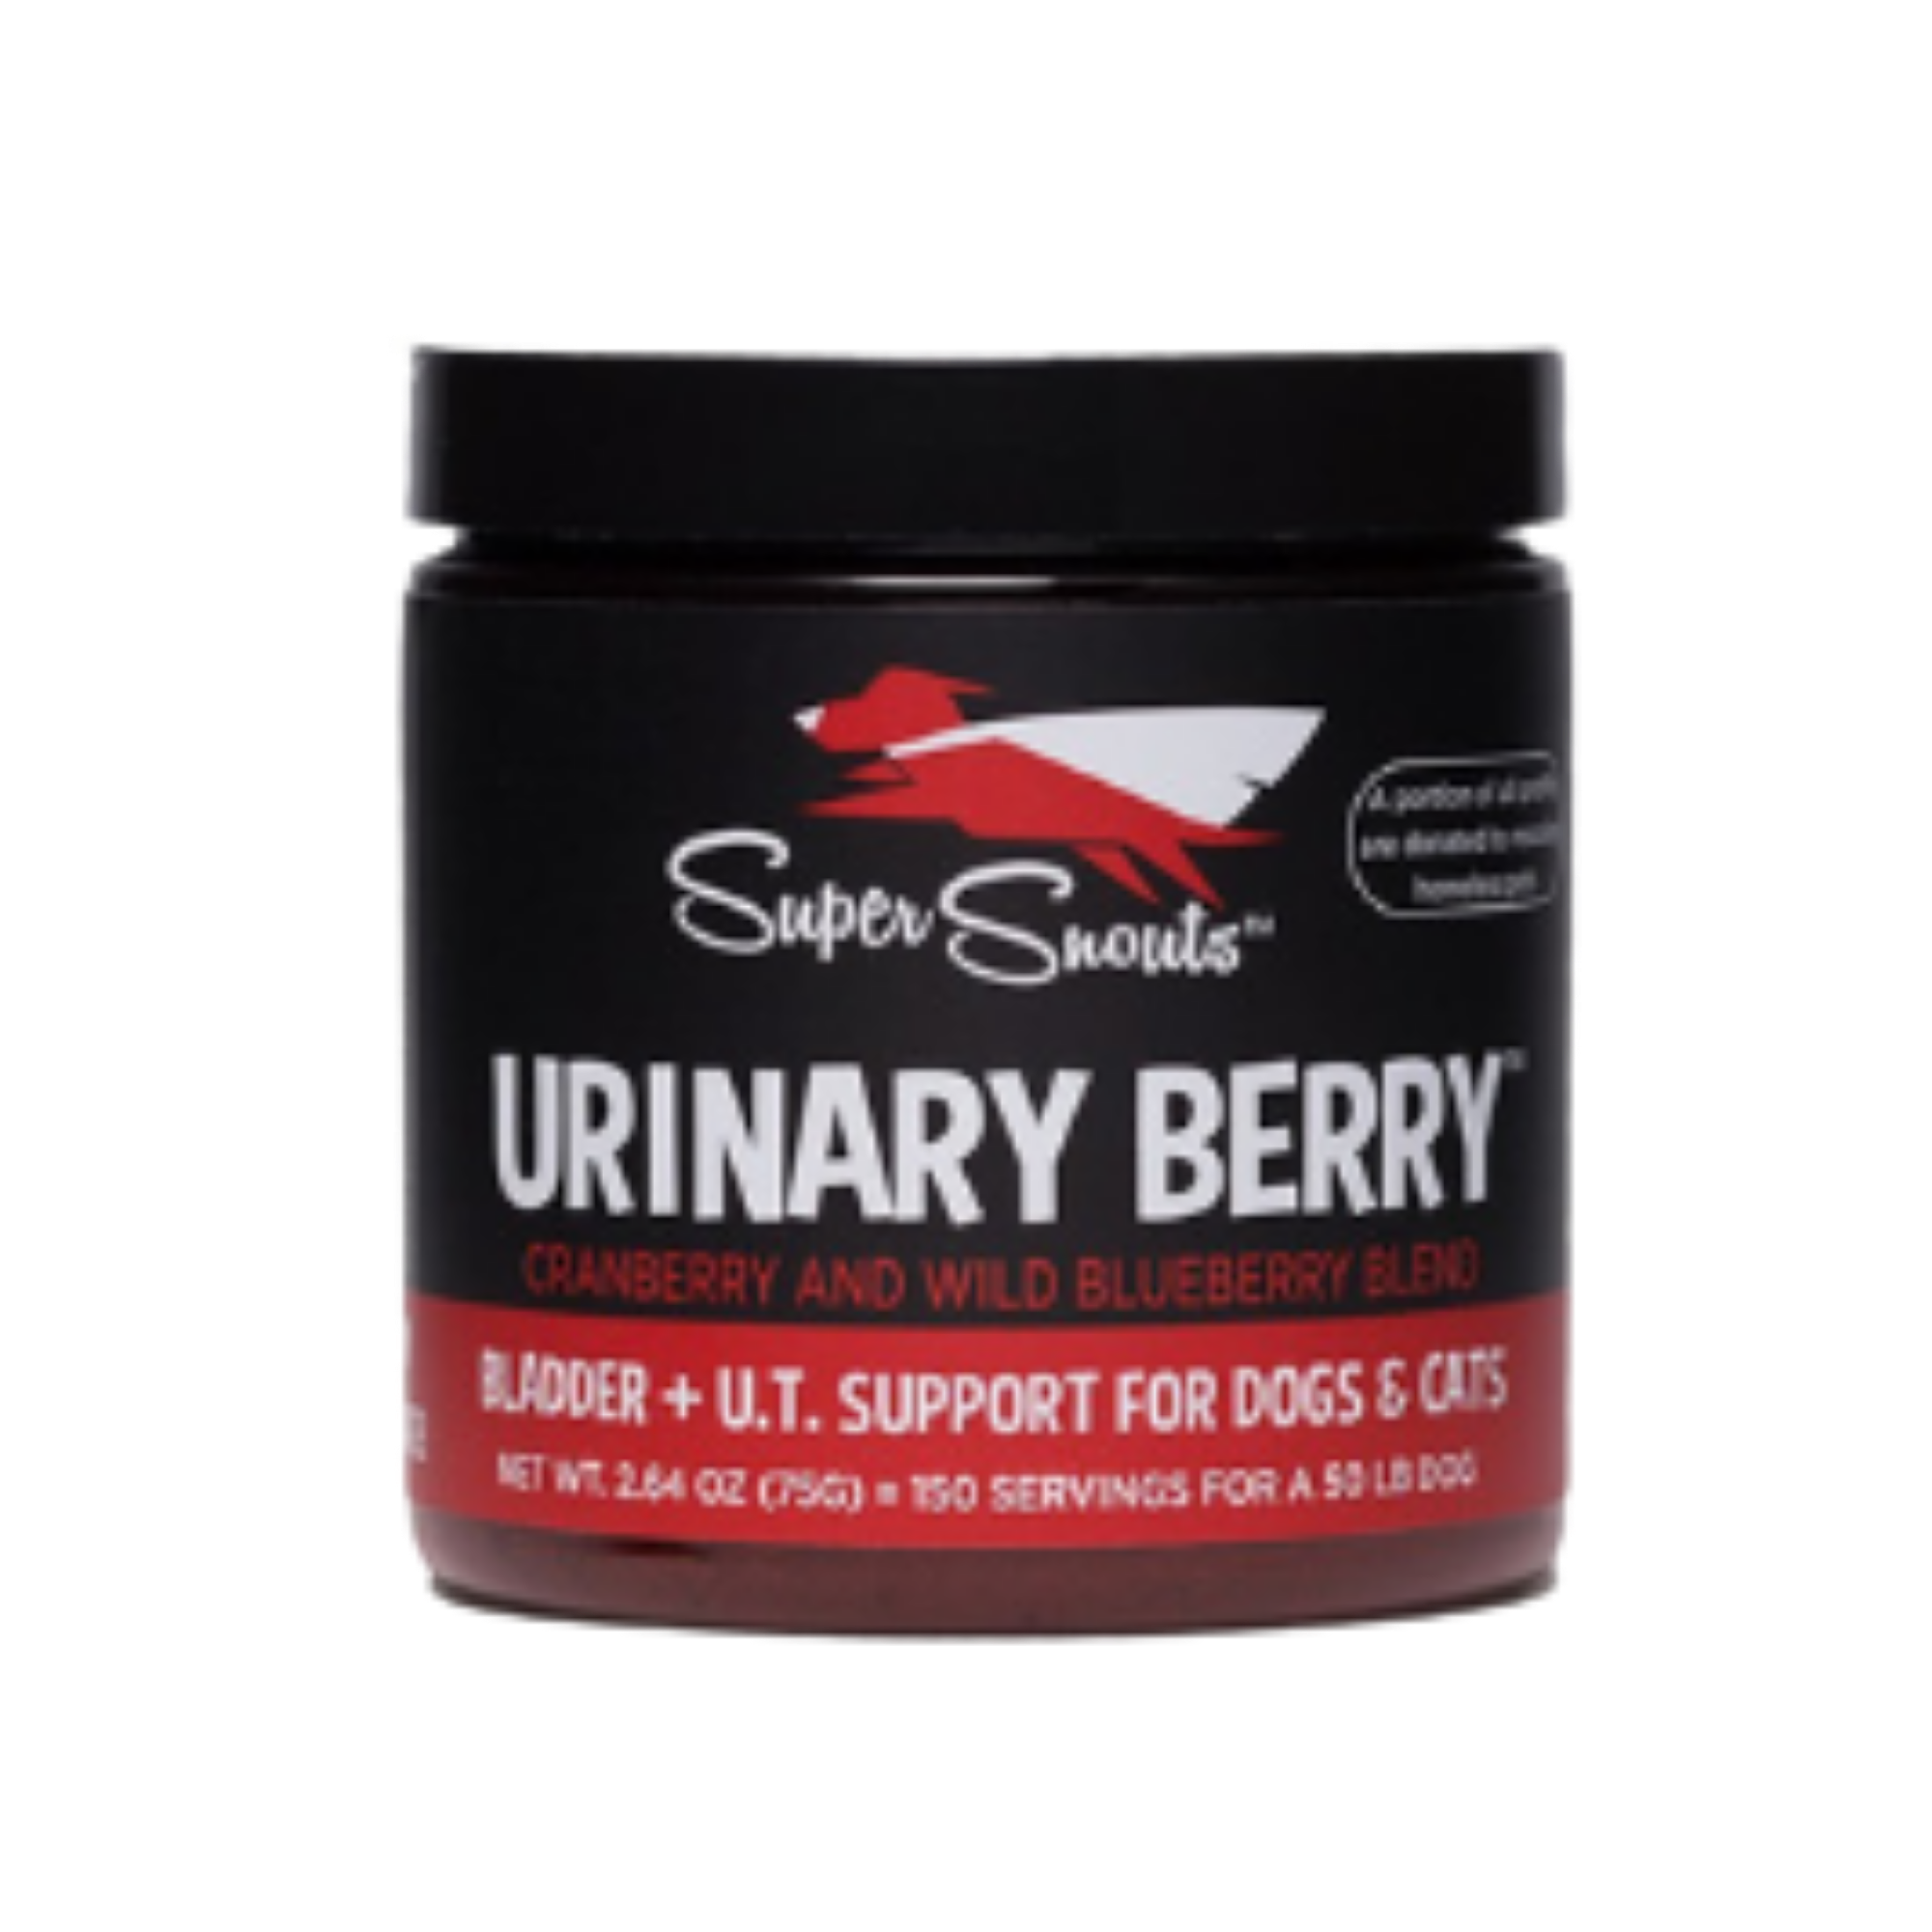 Super Snouts Urinary Berry Urinary Support Supplement for Dogs & Cats 2.64 oz - Mutts & Co.